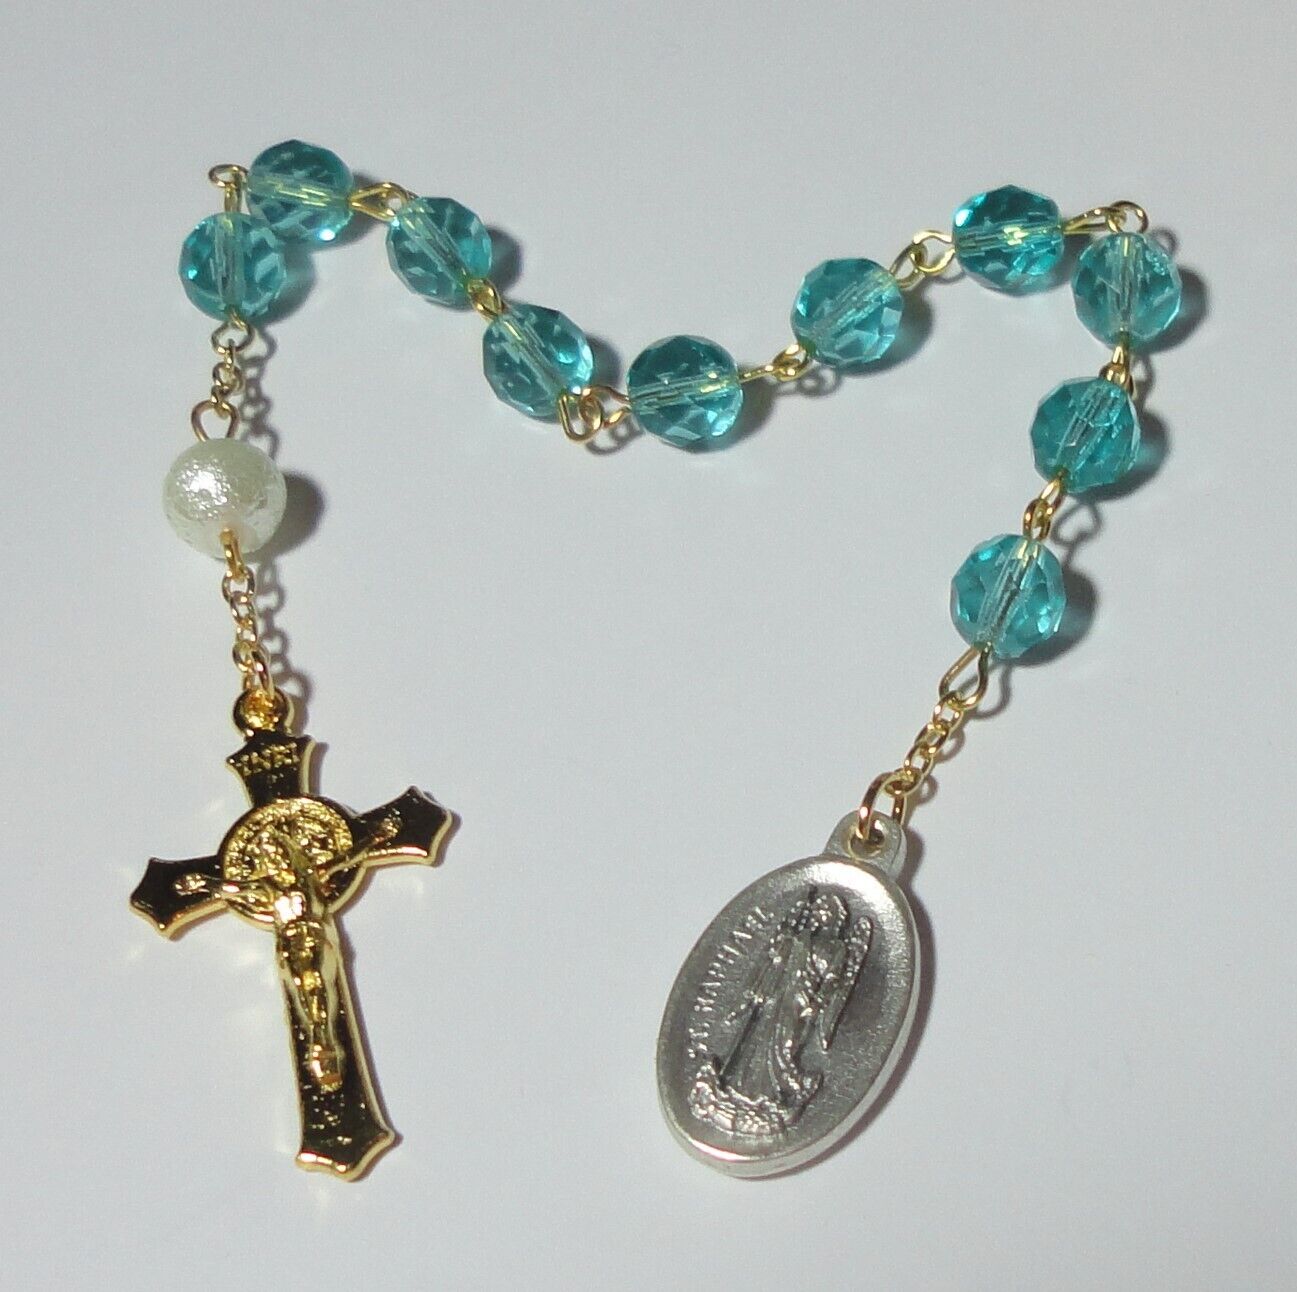 St Raphael & Jude Single Decade Rosary - Two Miracle Working & Healing Saints